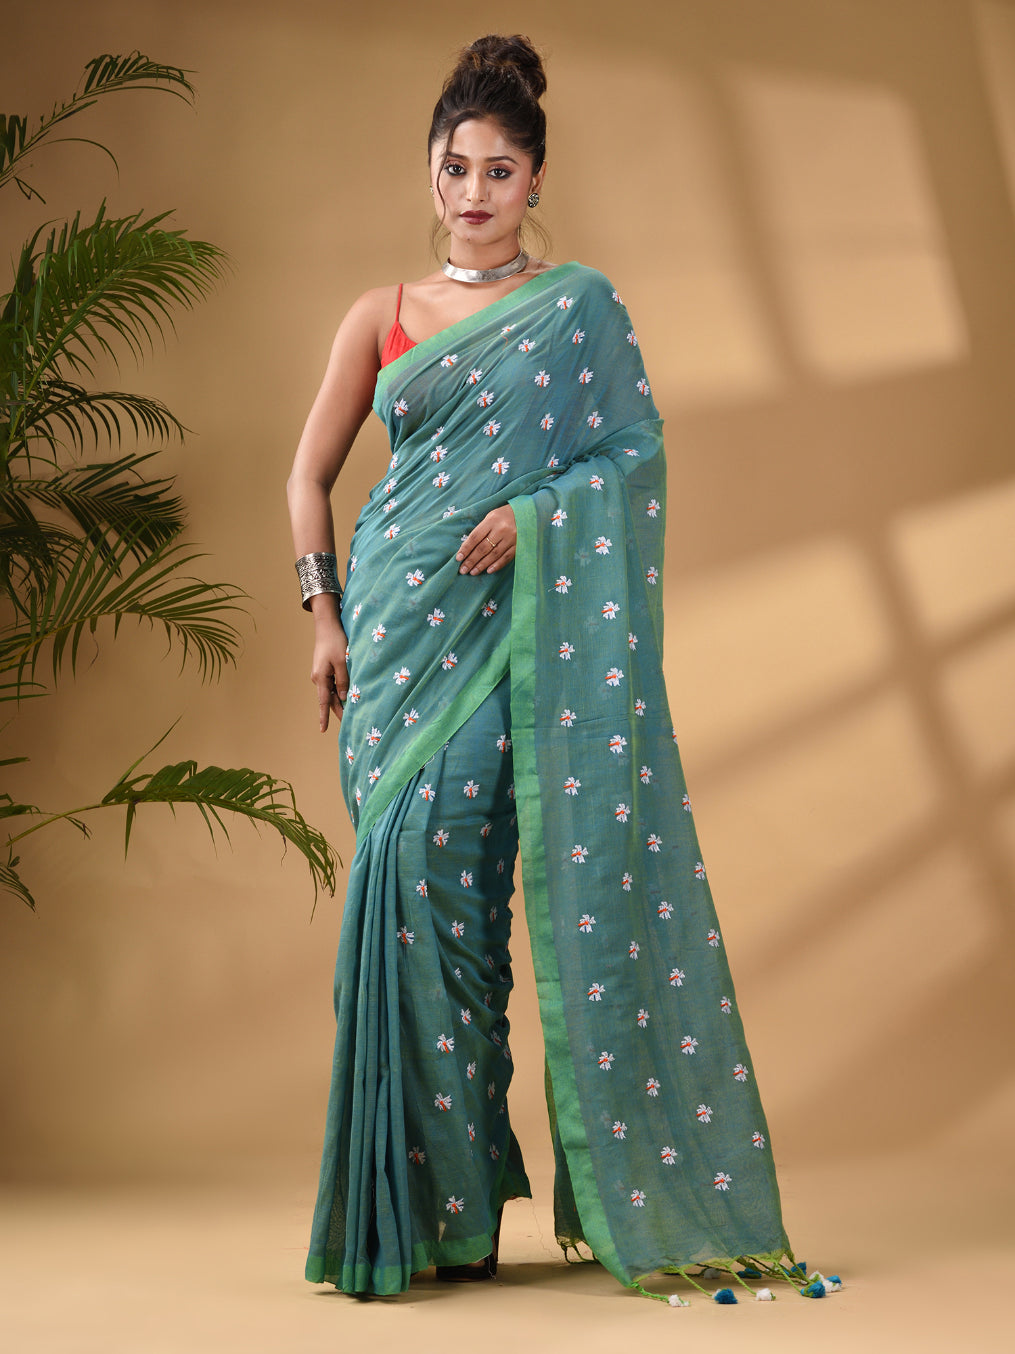 Sea Green Cotton Handwoven Soft Saree With Floral Motifs